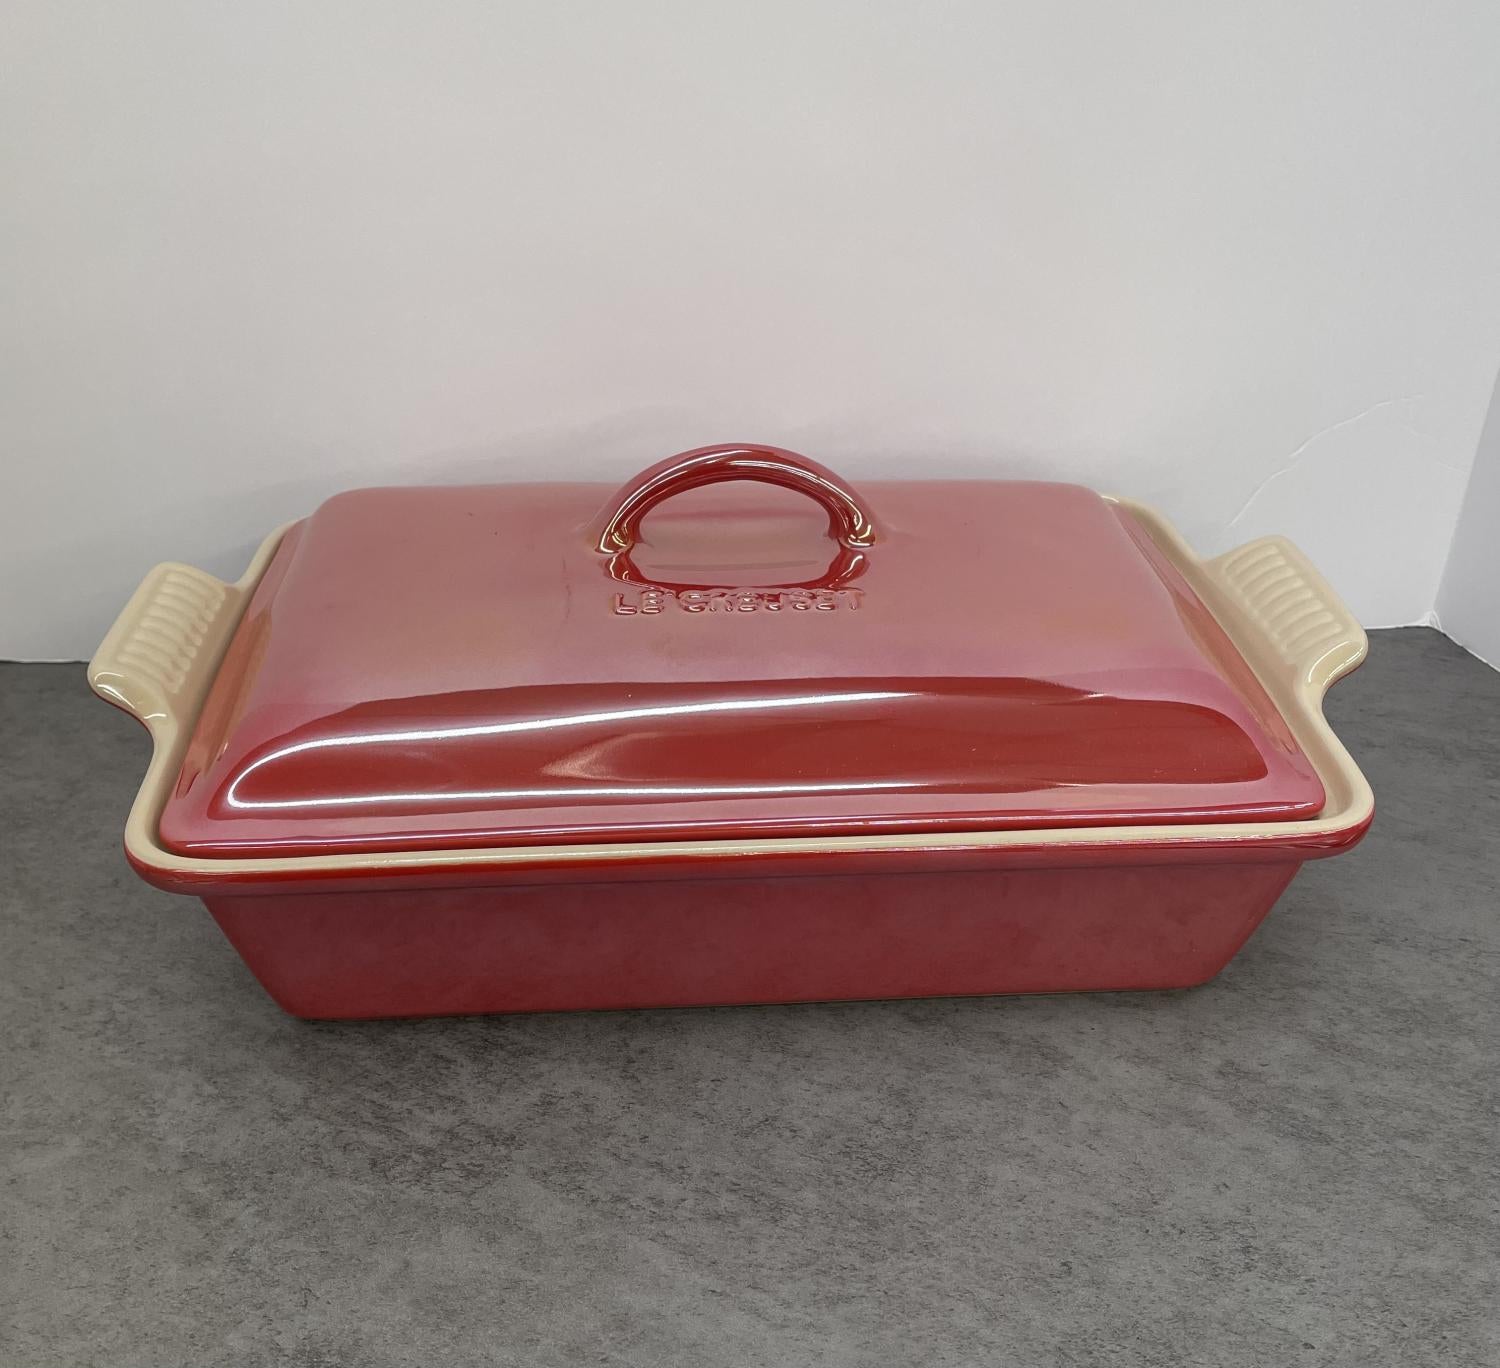 Le Creuset Rectangular Food Storage Containers